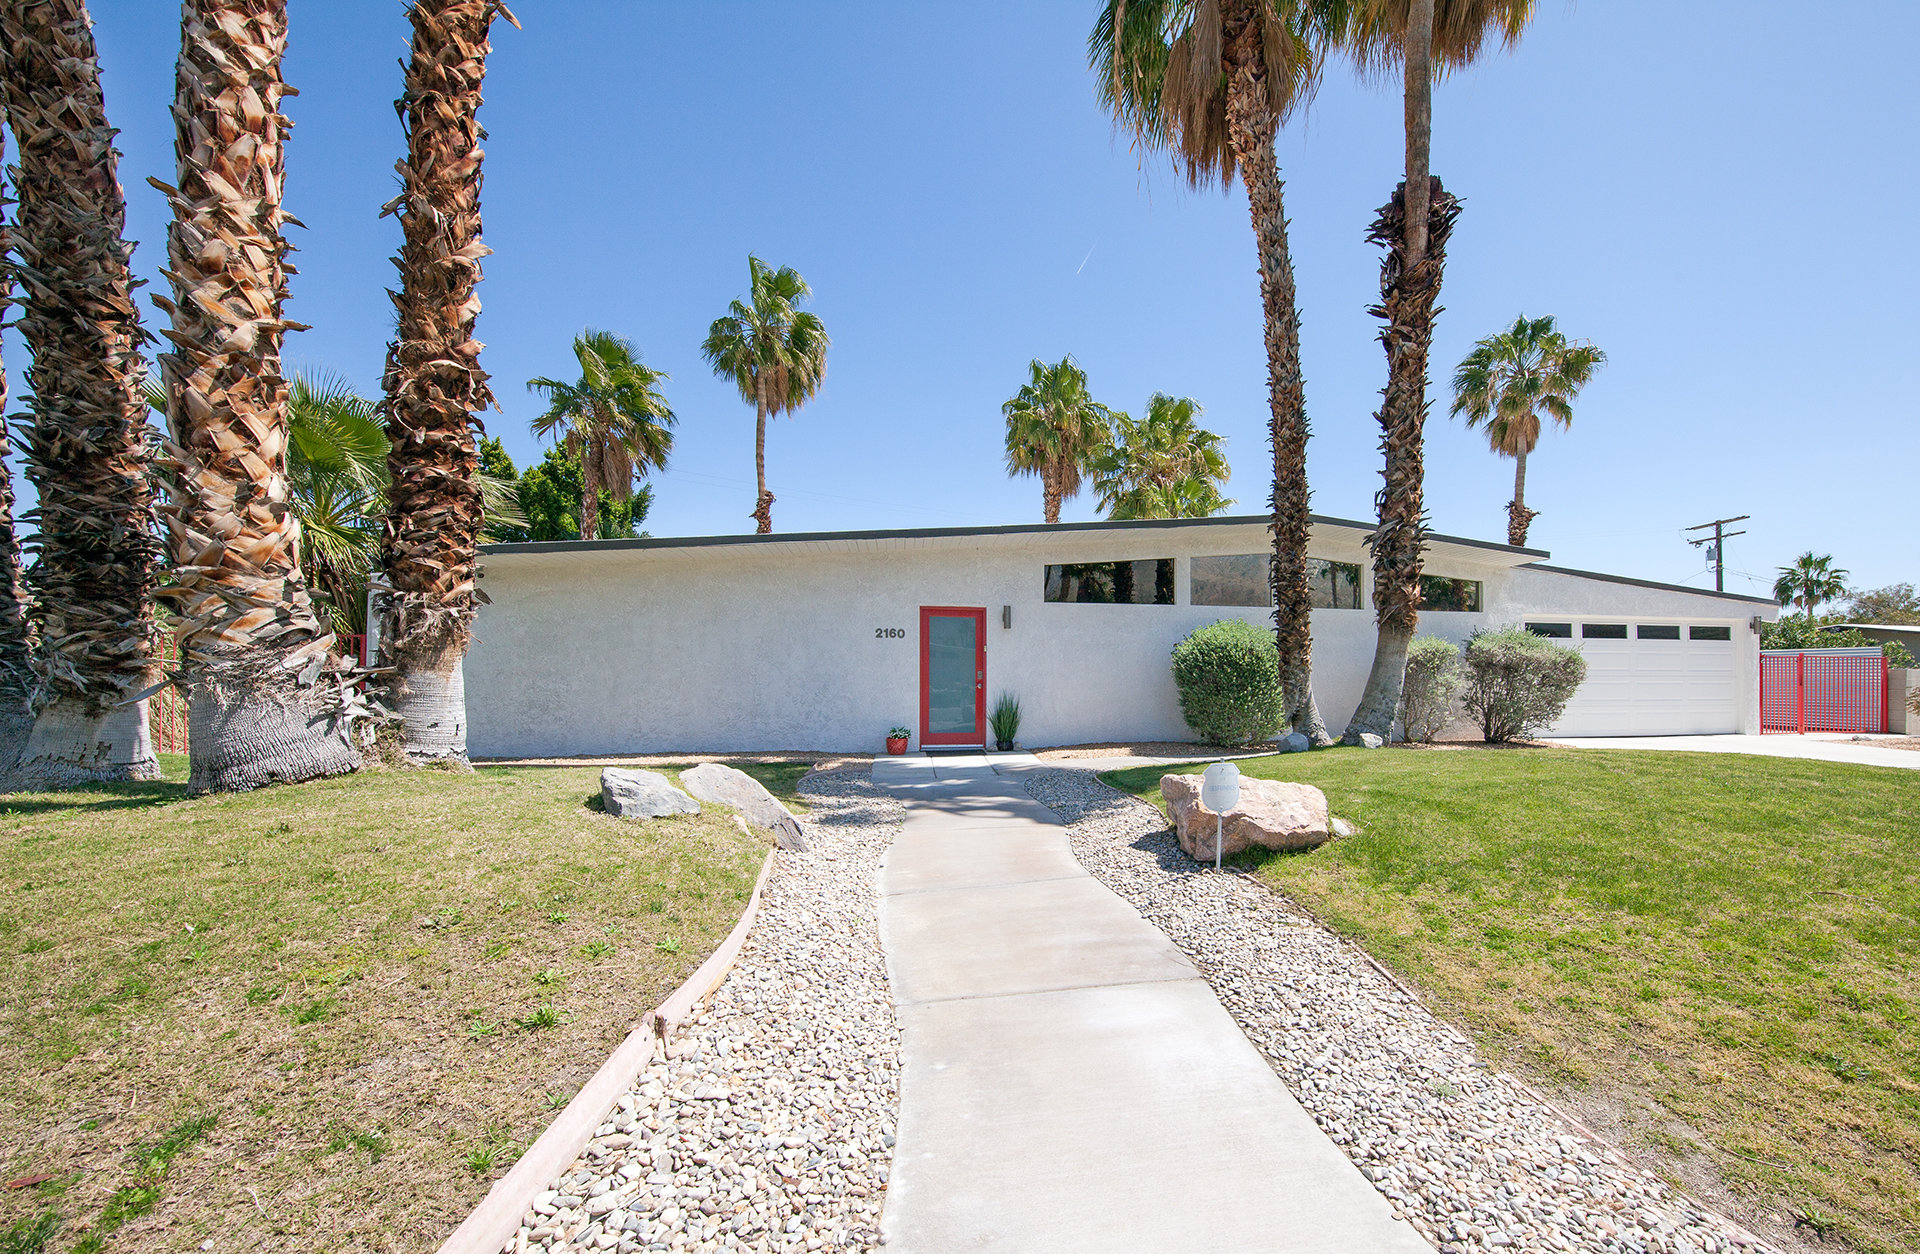 An Alexander home in the Racquet Club Estates neighborhood of Palm Springs 